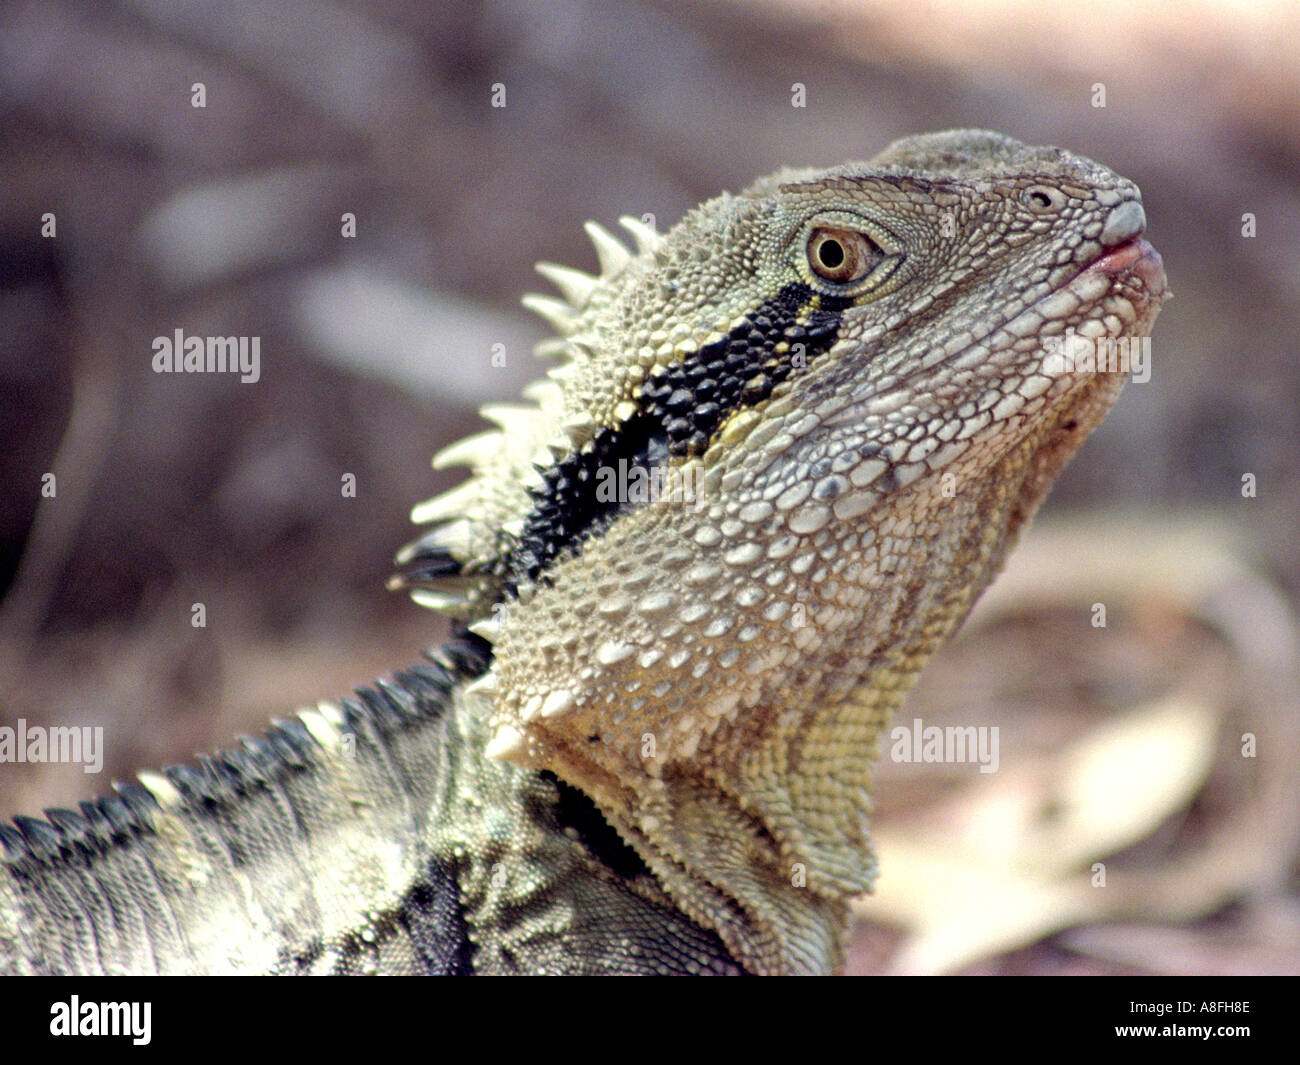 A CLOSE UP OF A WATER DRAGONS HEAD BAPN 441 Stock Photo